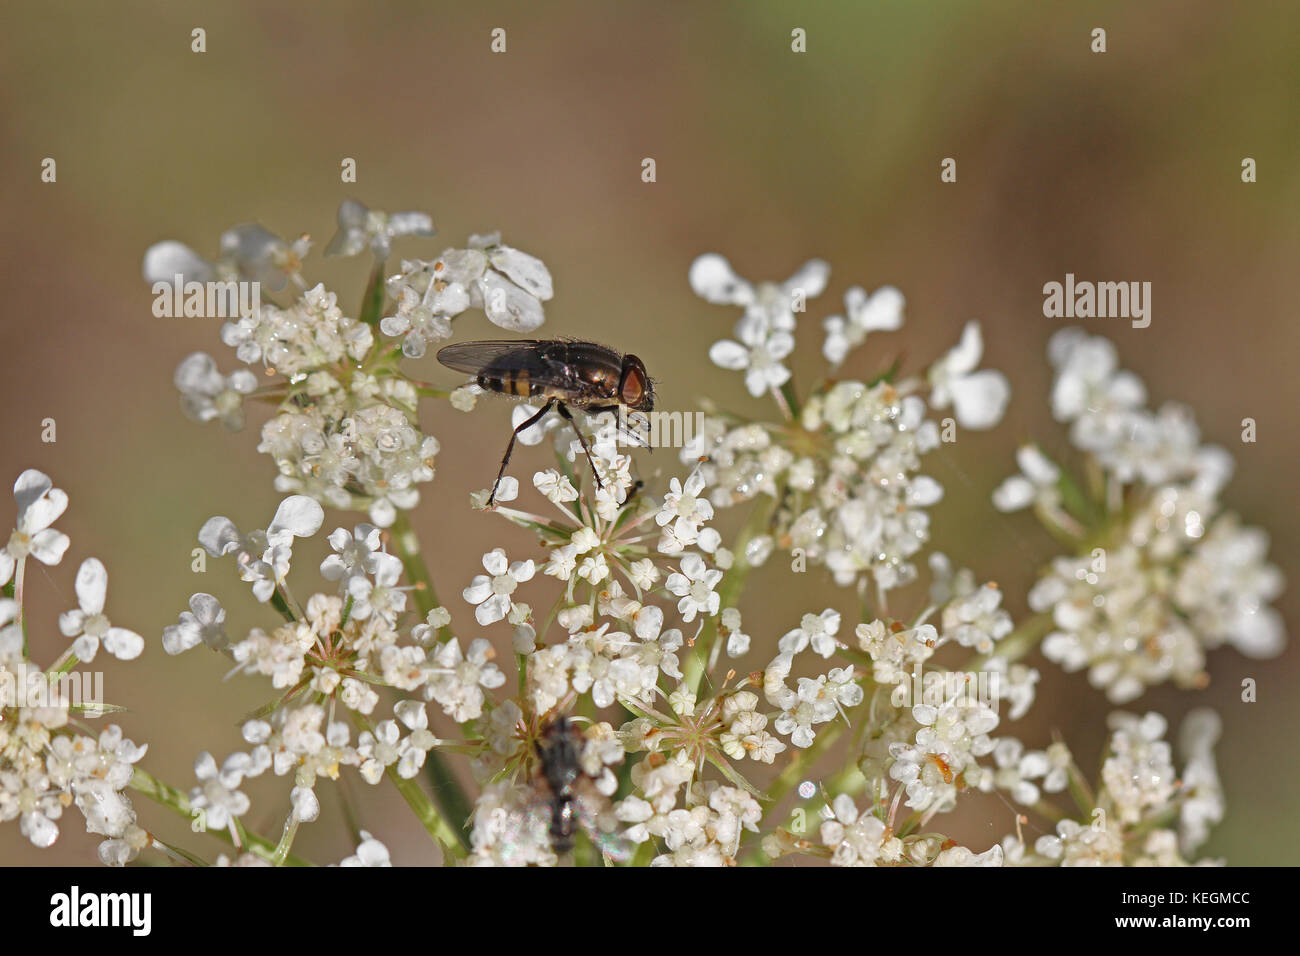 house fly or housefly Latin name musca domestica or stomoxys calcitrans muscidae extremely close up feeding on viburnum flower caprifoliaceae in Italy Stock Photo